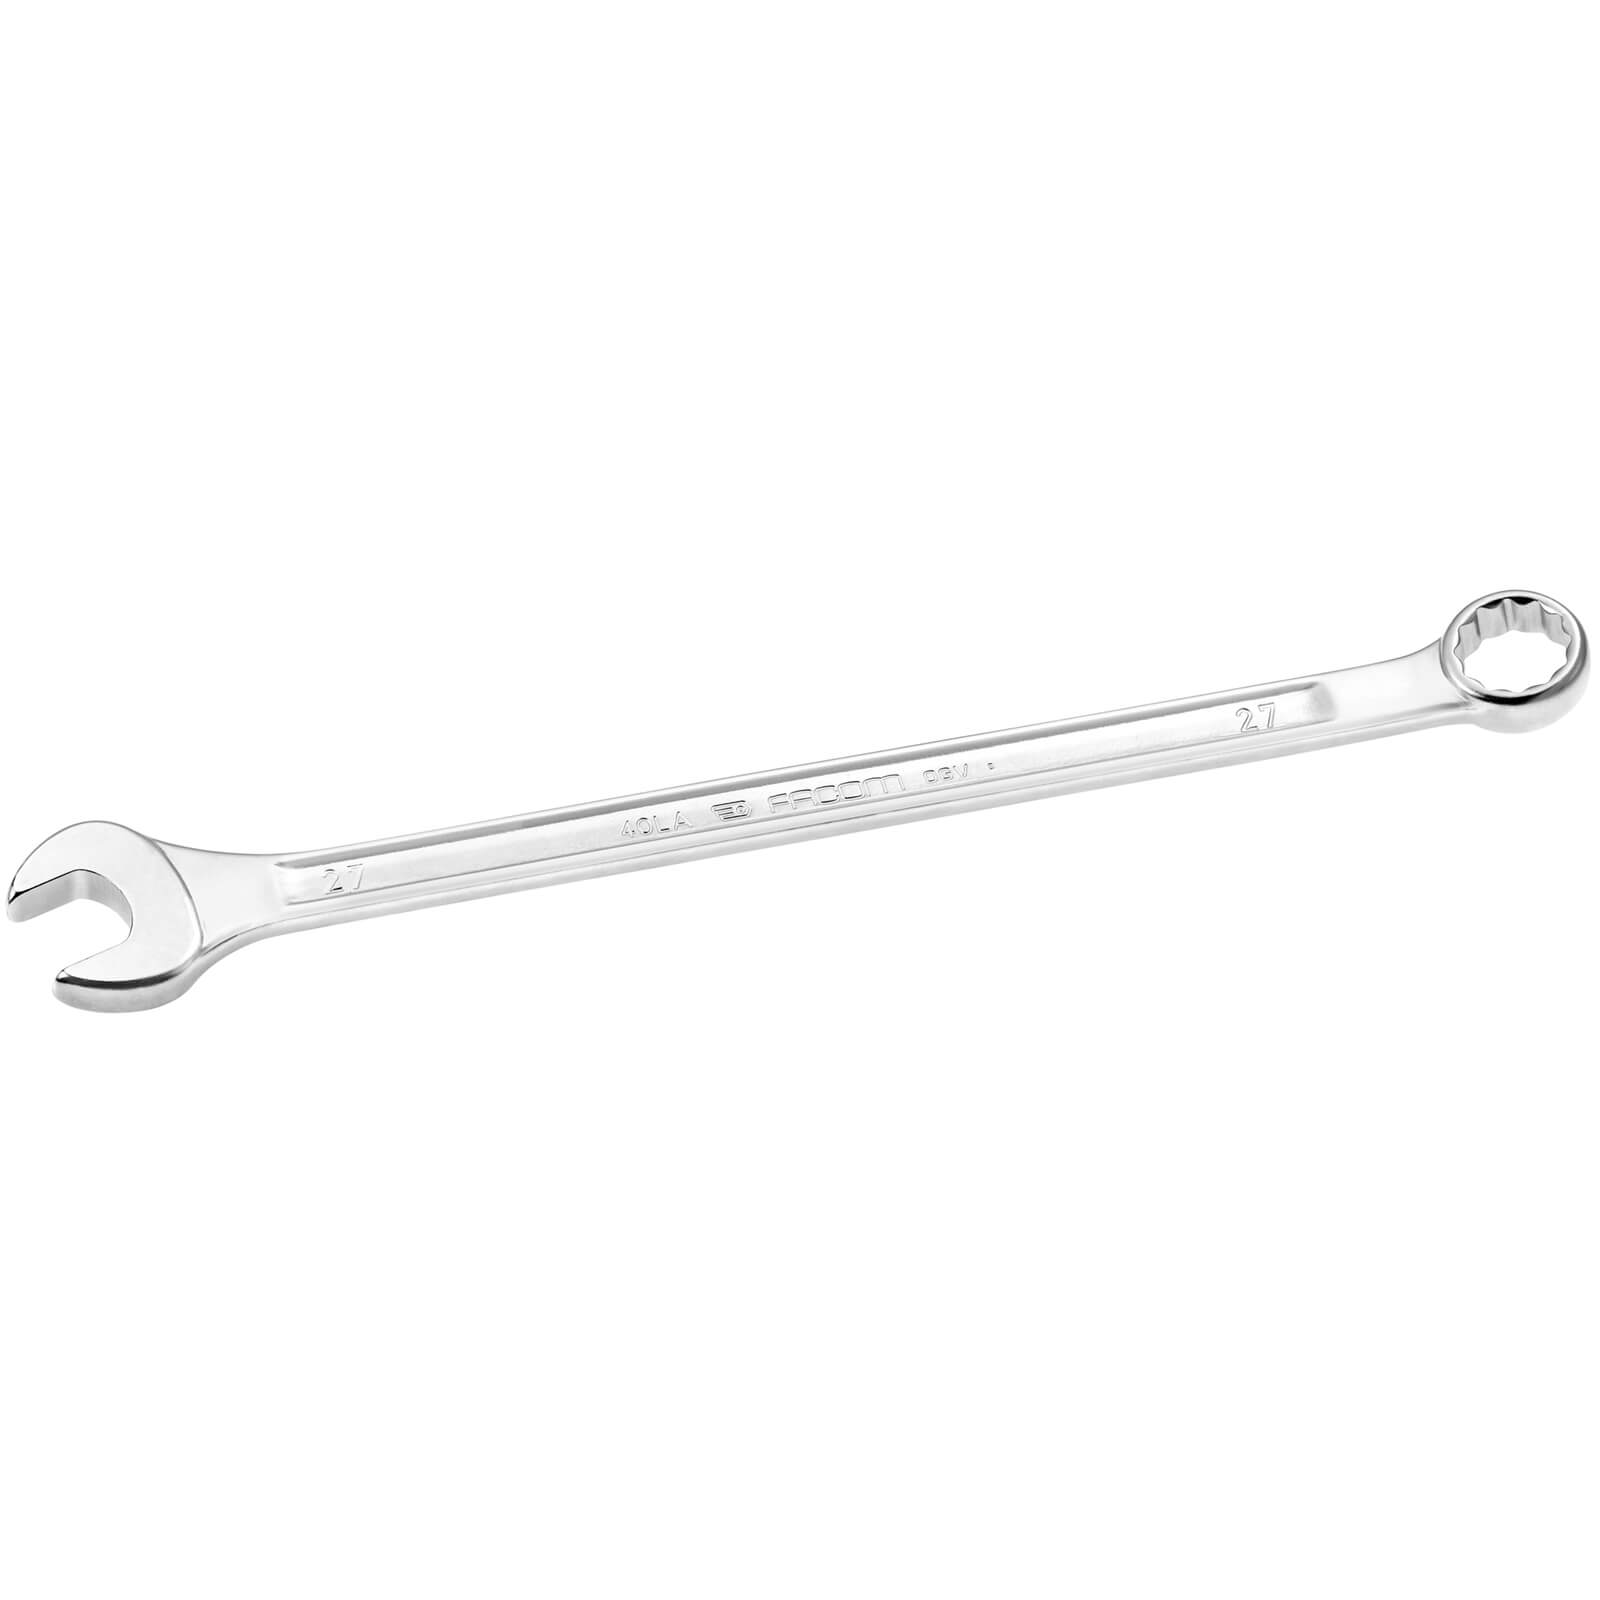 Image of Facom Long Reach Combination Spanner Metric 29mm